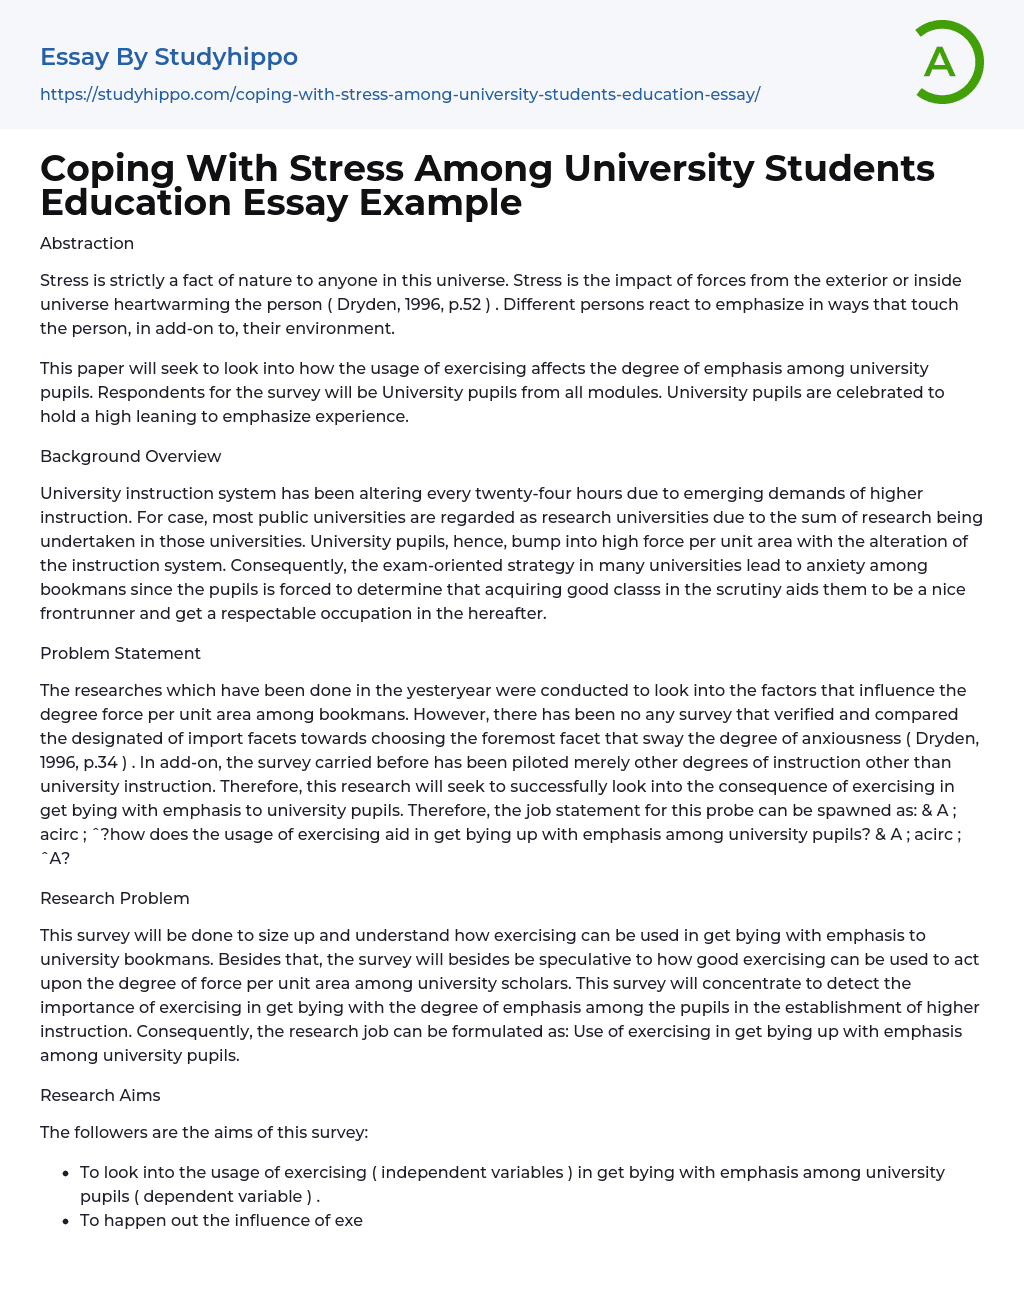 Coping With Stress Among University Students Education Essay Example